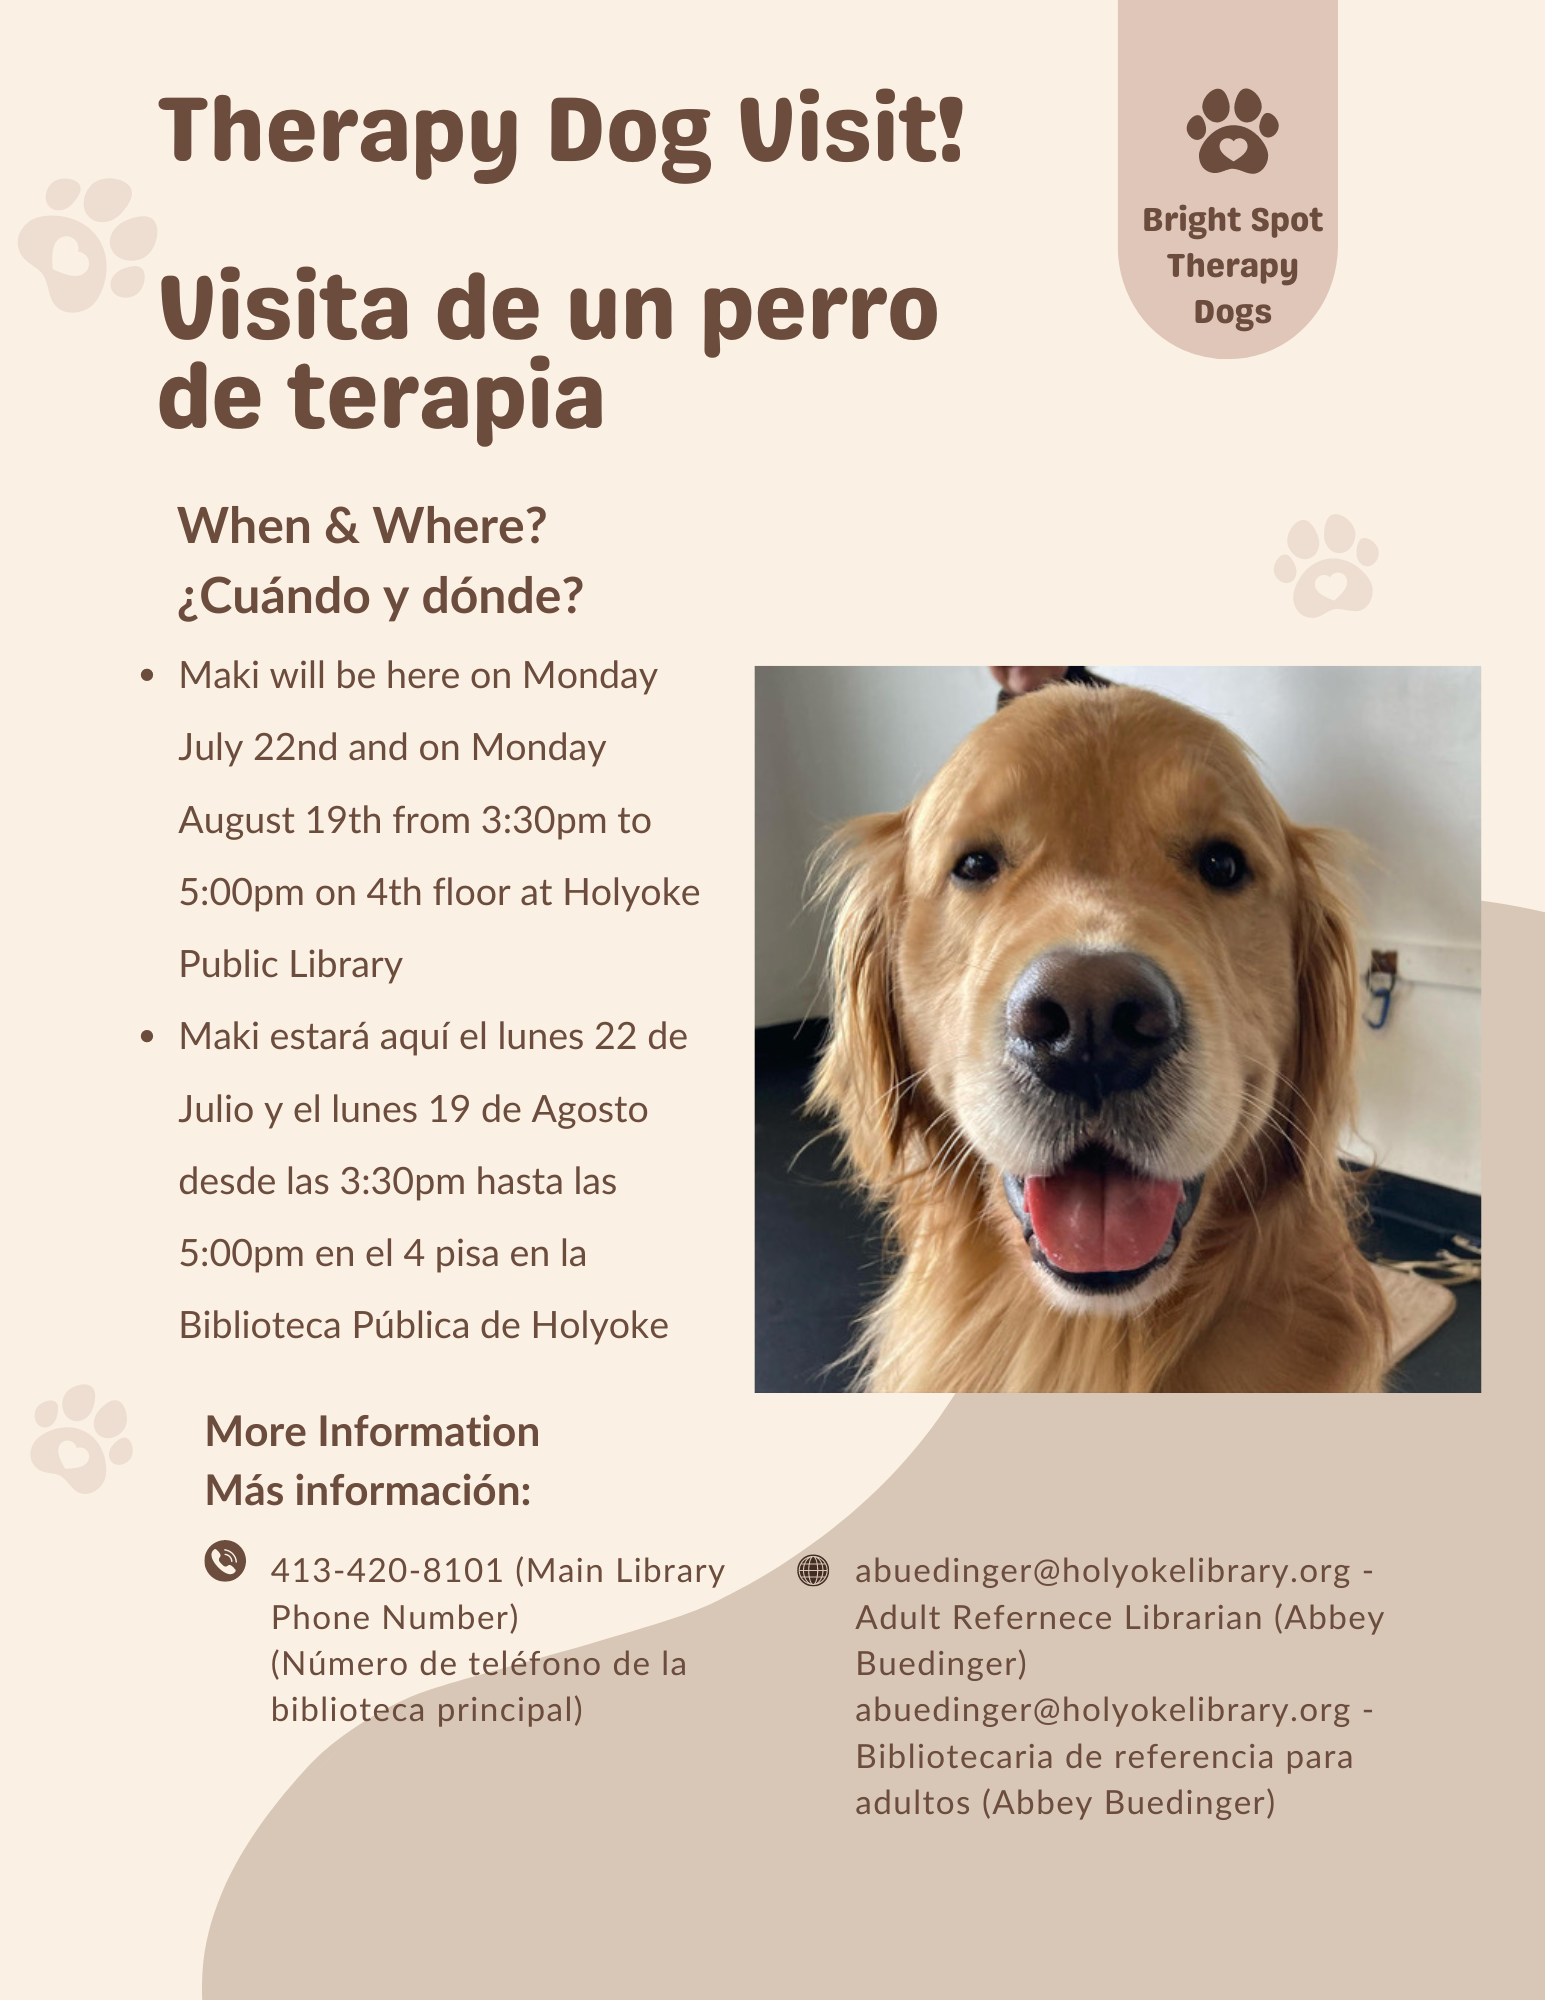 Come Visit Maki the Therapy Dog on Monday July 22nd and August 22nd from 3:30pm to 5:00pm!